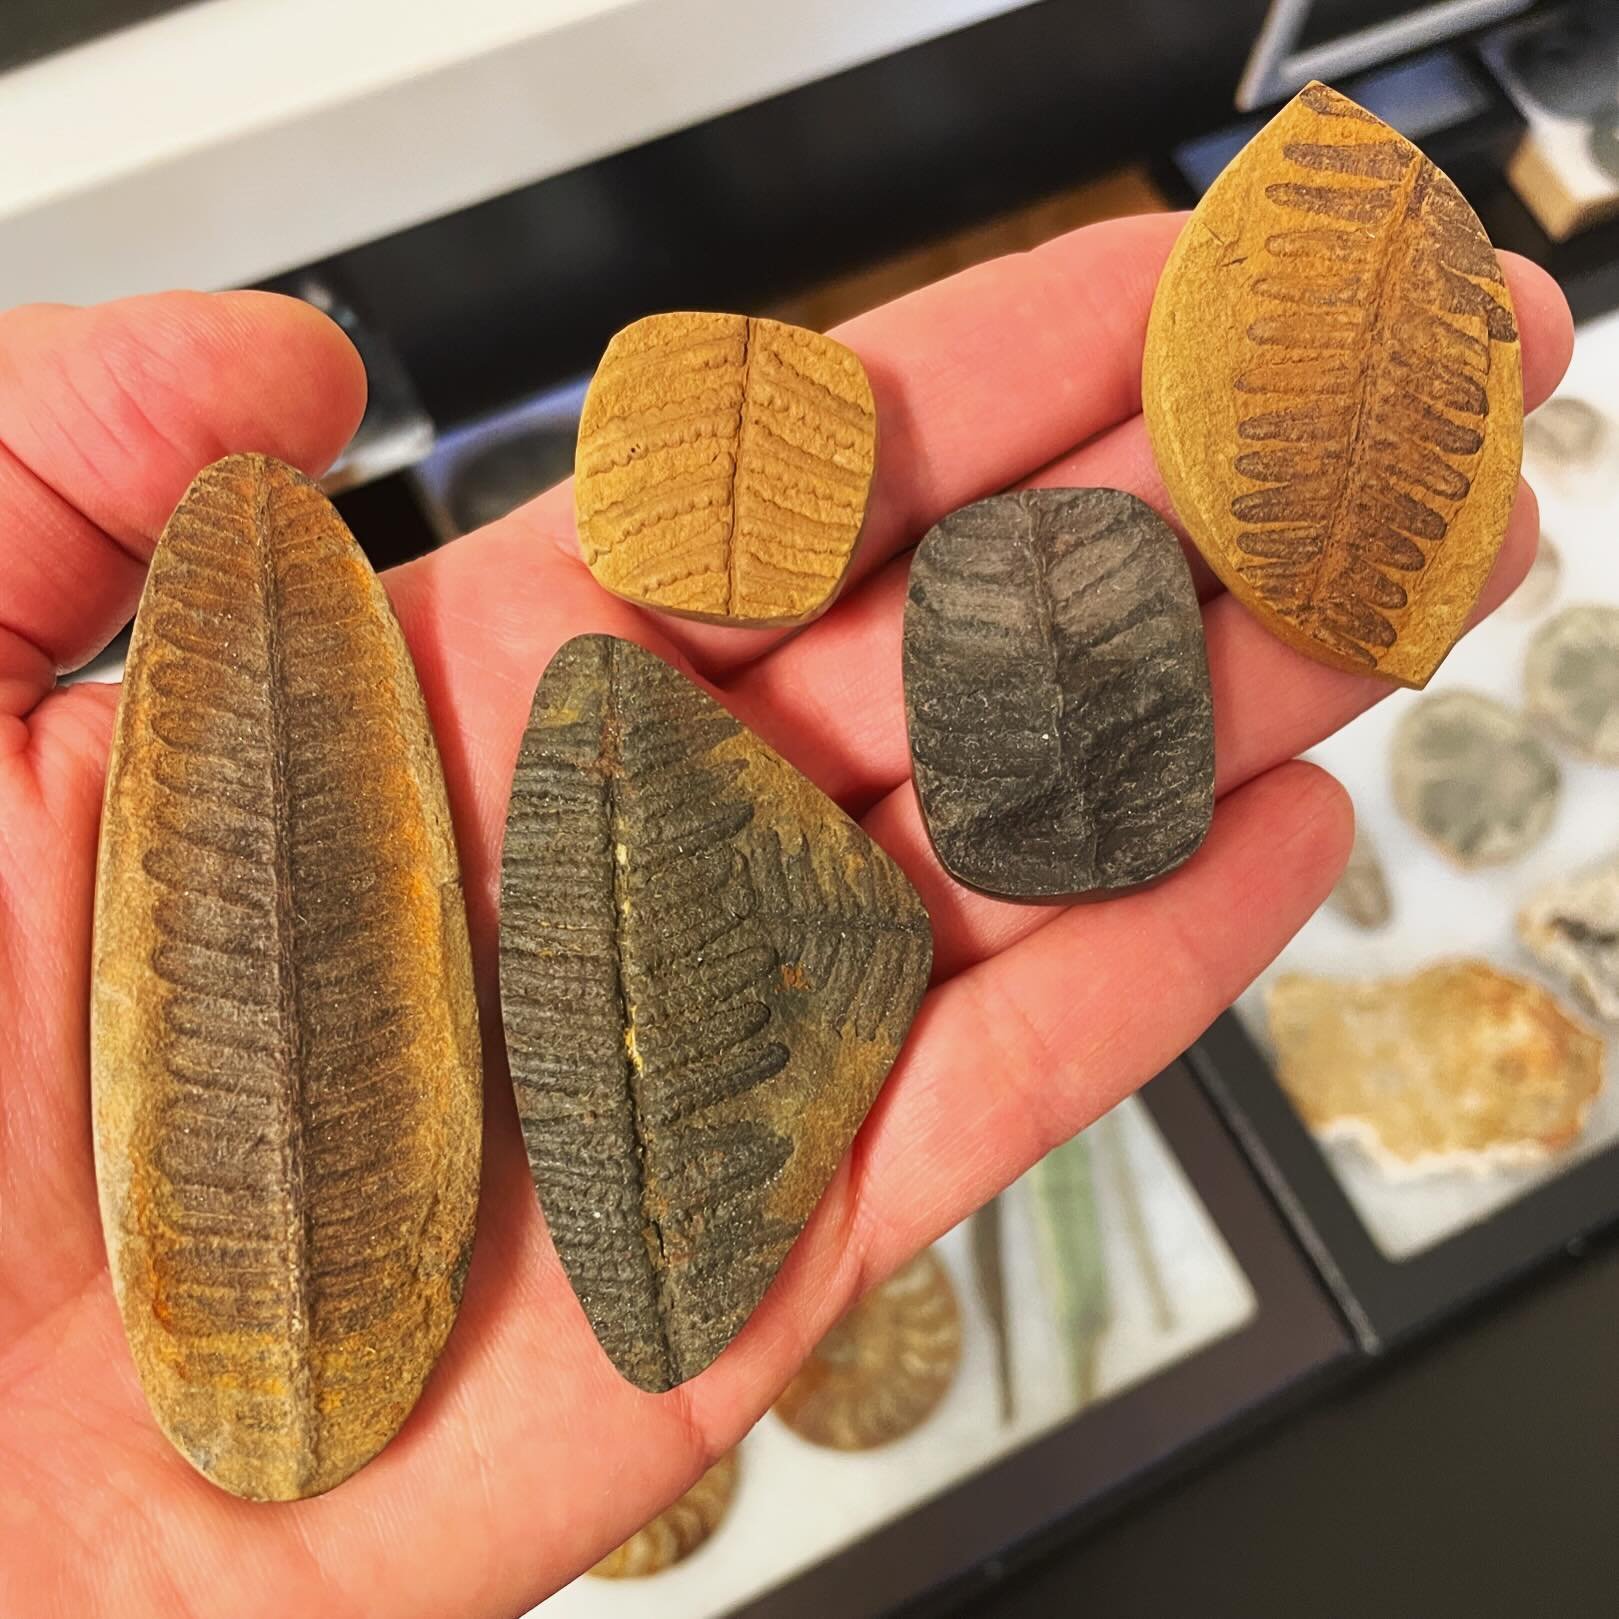 I know I haven&rsquo;t posted in approx. one million days&hellip; but today is Earth Day! 🌎 So I am leaving these gorgeous earthy fossil ferns here for you. 🌱 I hope to be capturing them in silver someday soon! Thank you for hanging in there with m